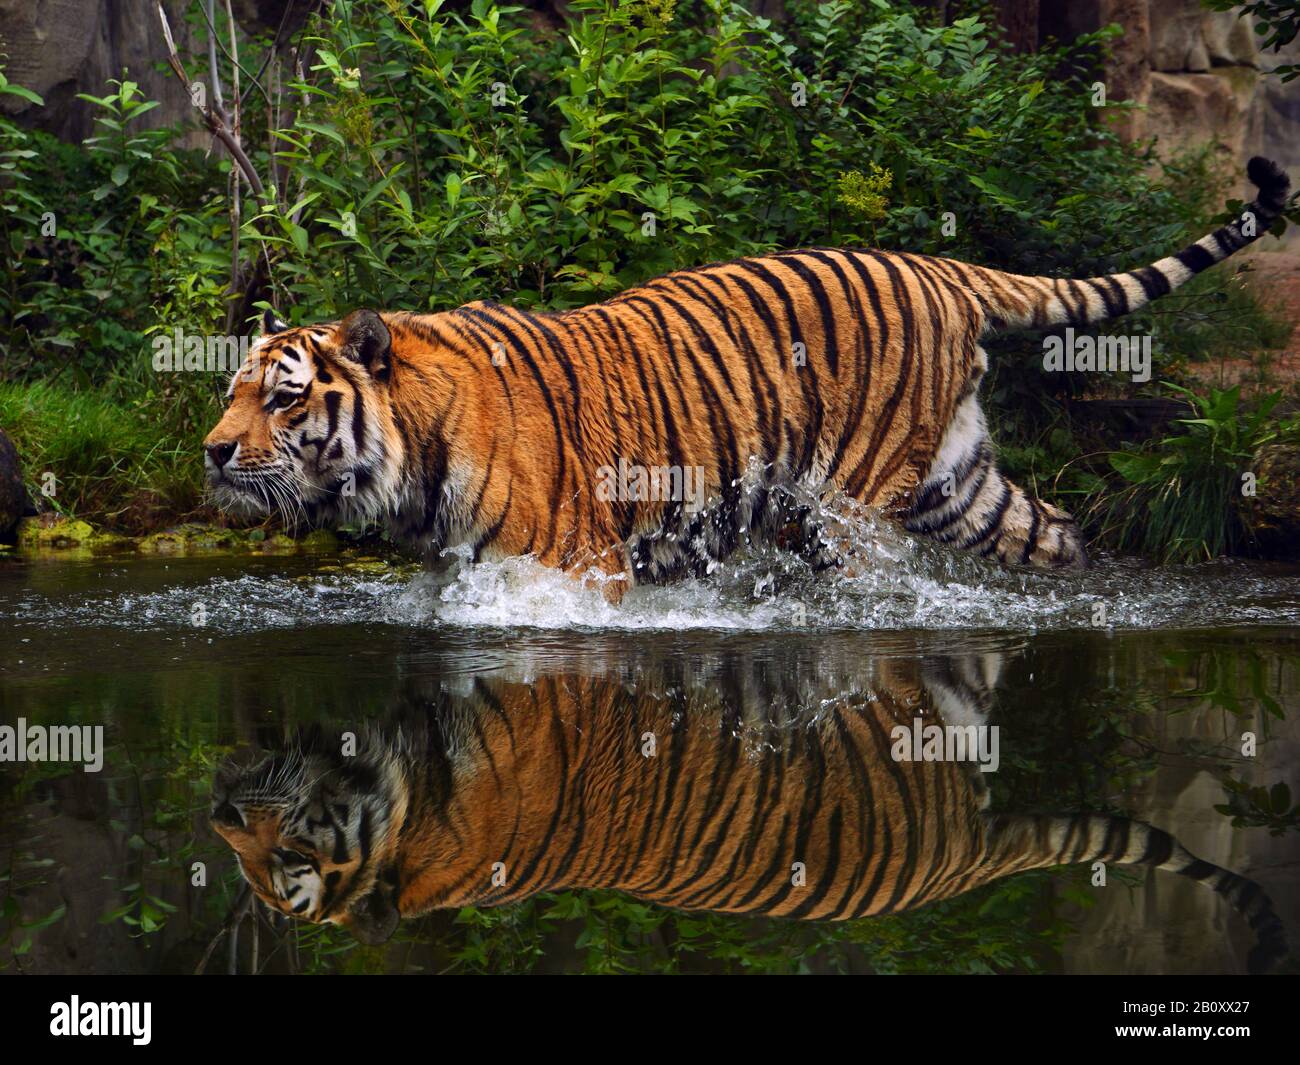 Siberian tiger, Amurian tiger (Panthera tigris altaica), walking into the water, side view Stock Photo